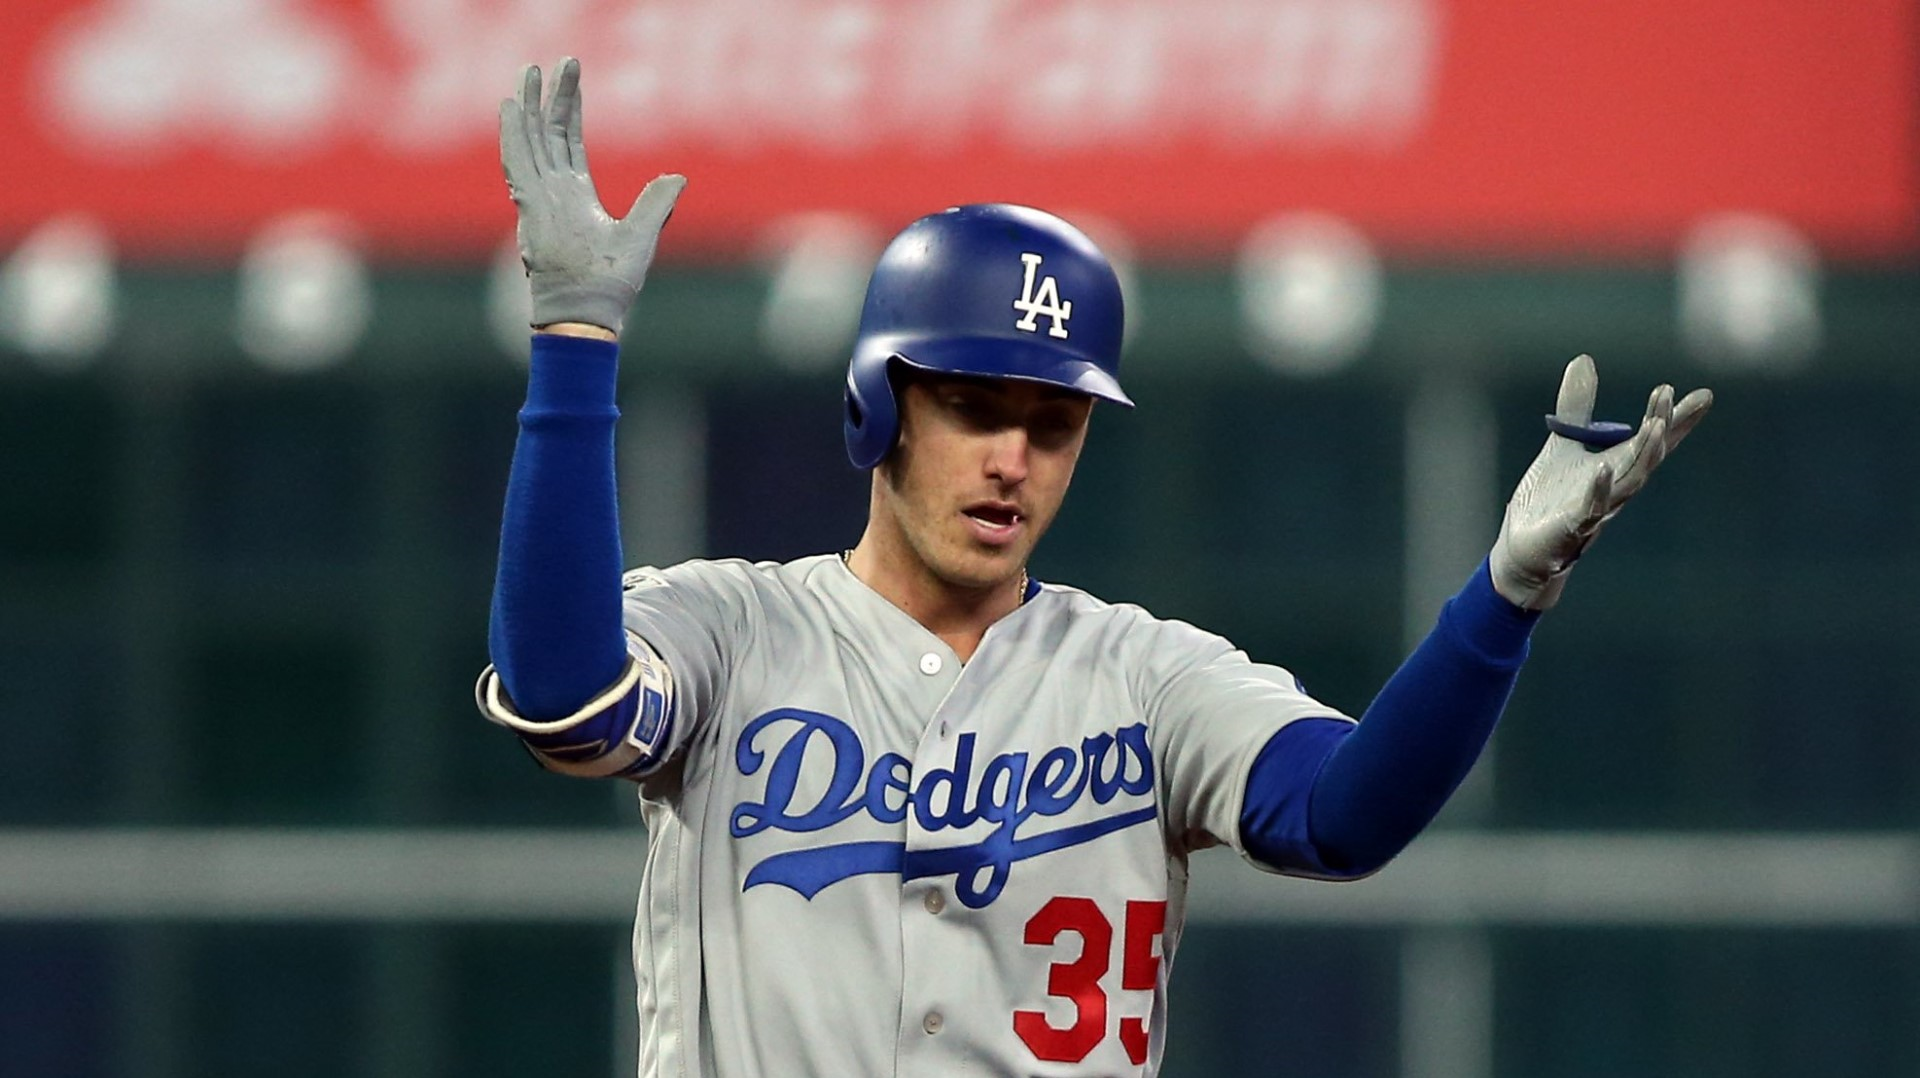 Arizona native Cody Bellinger wins NL Rookie of the Year for Dodgers